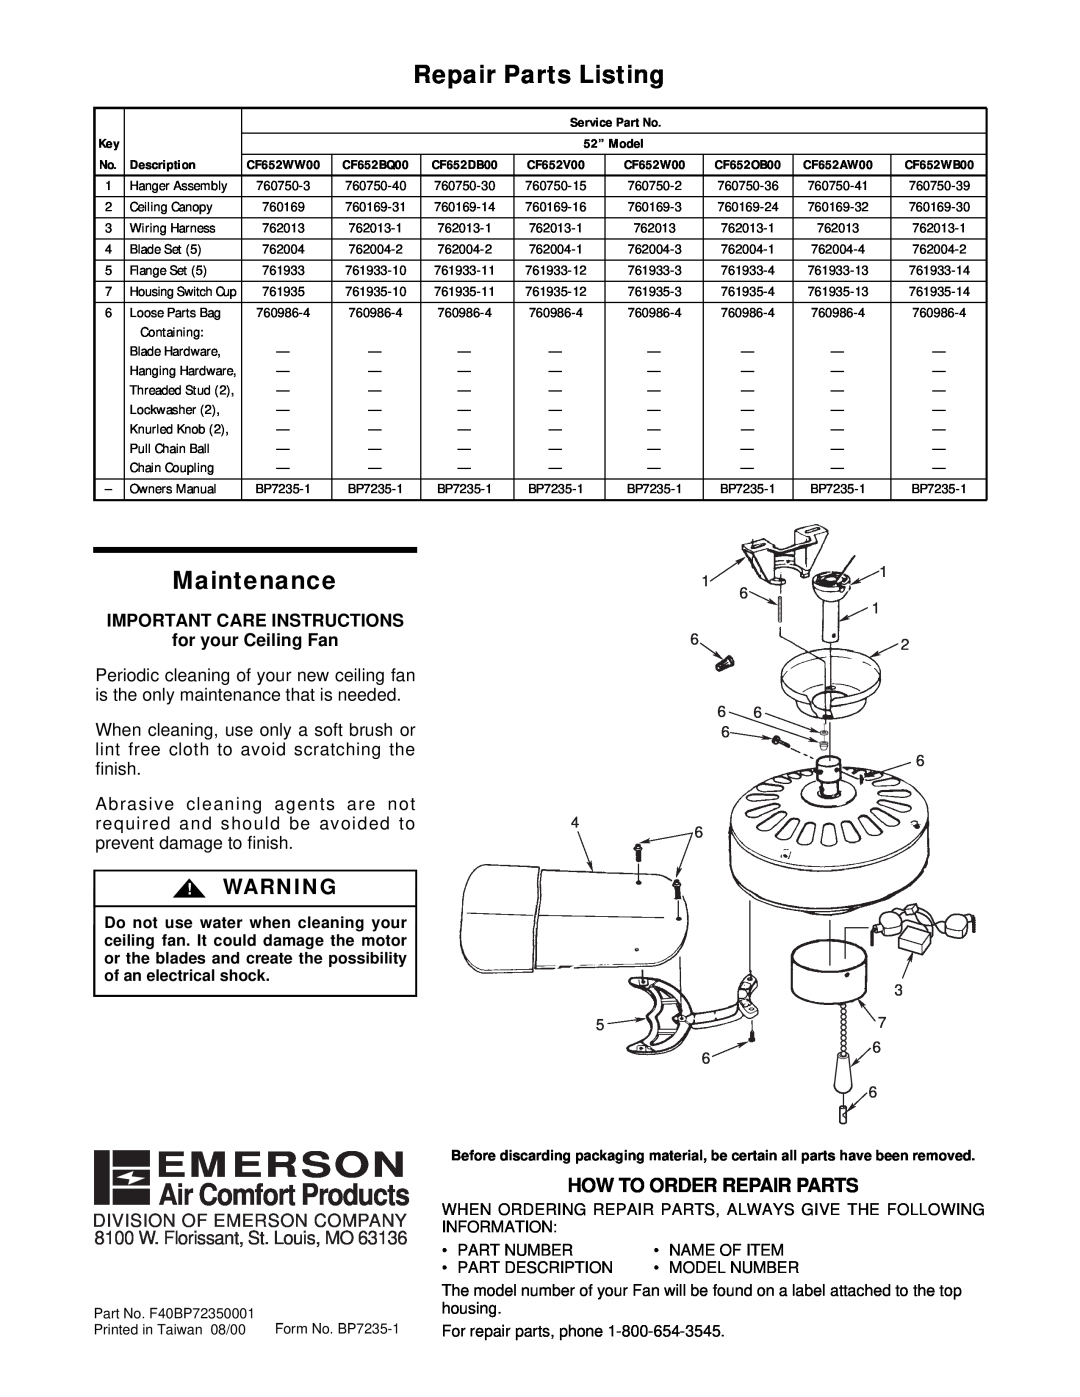 Emerson CF652W00, CF652WW00 Emerson, Air Comfort Products, Repair Parts Listing, Maintenance, How To Order Repair Parts 